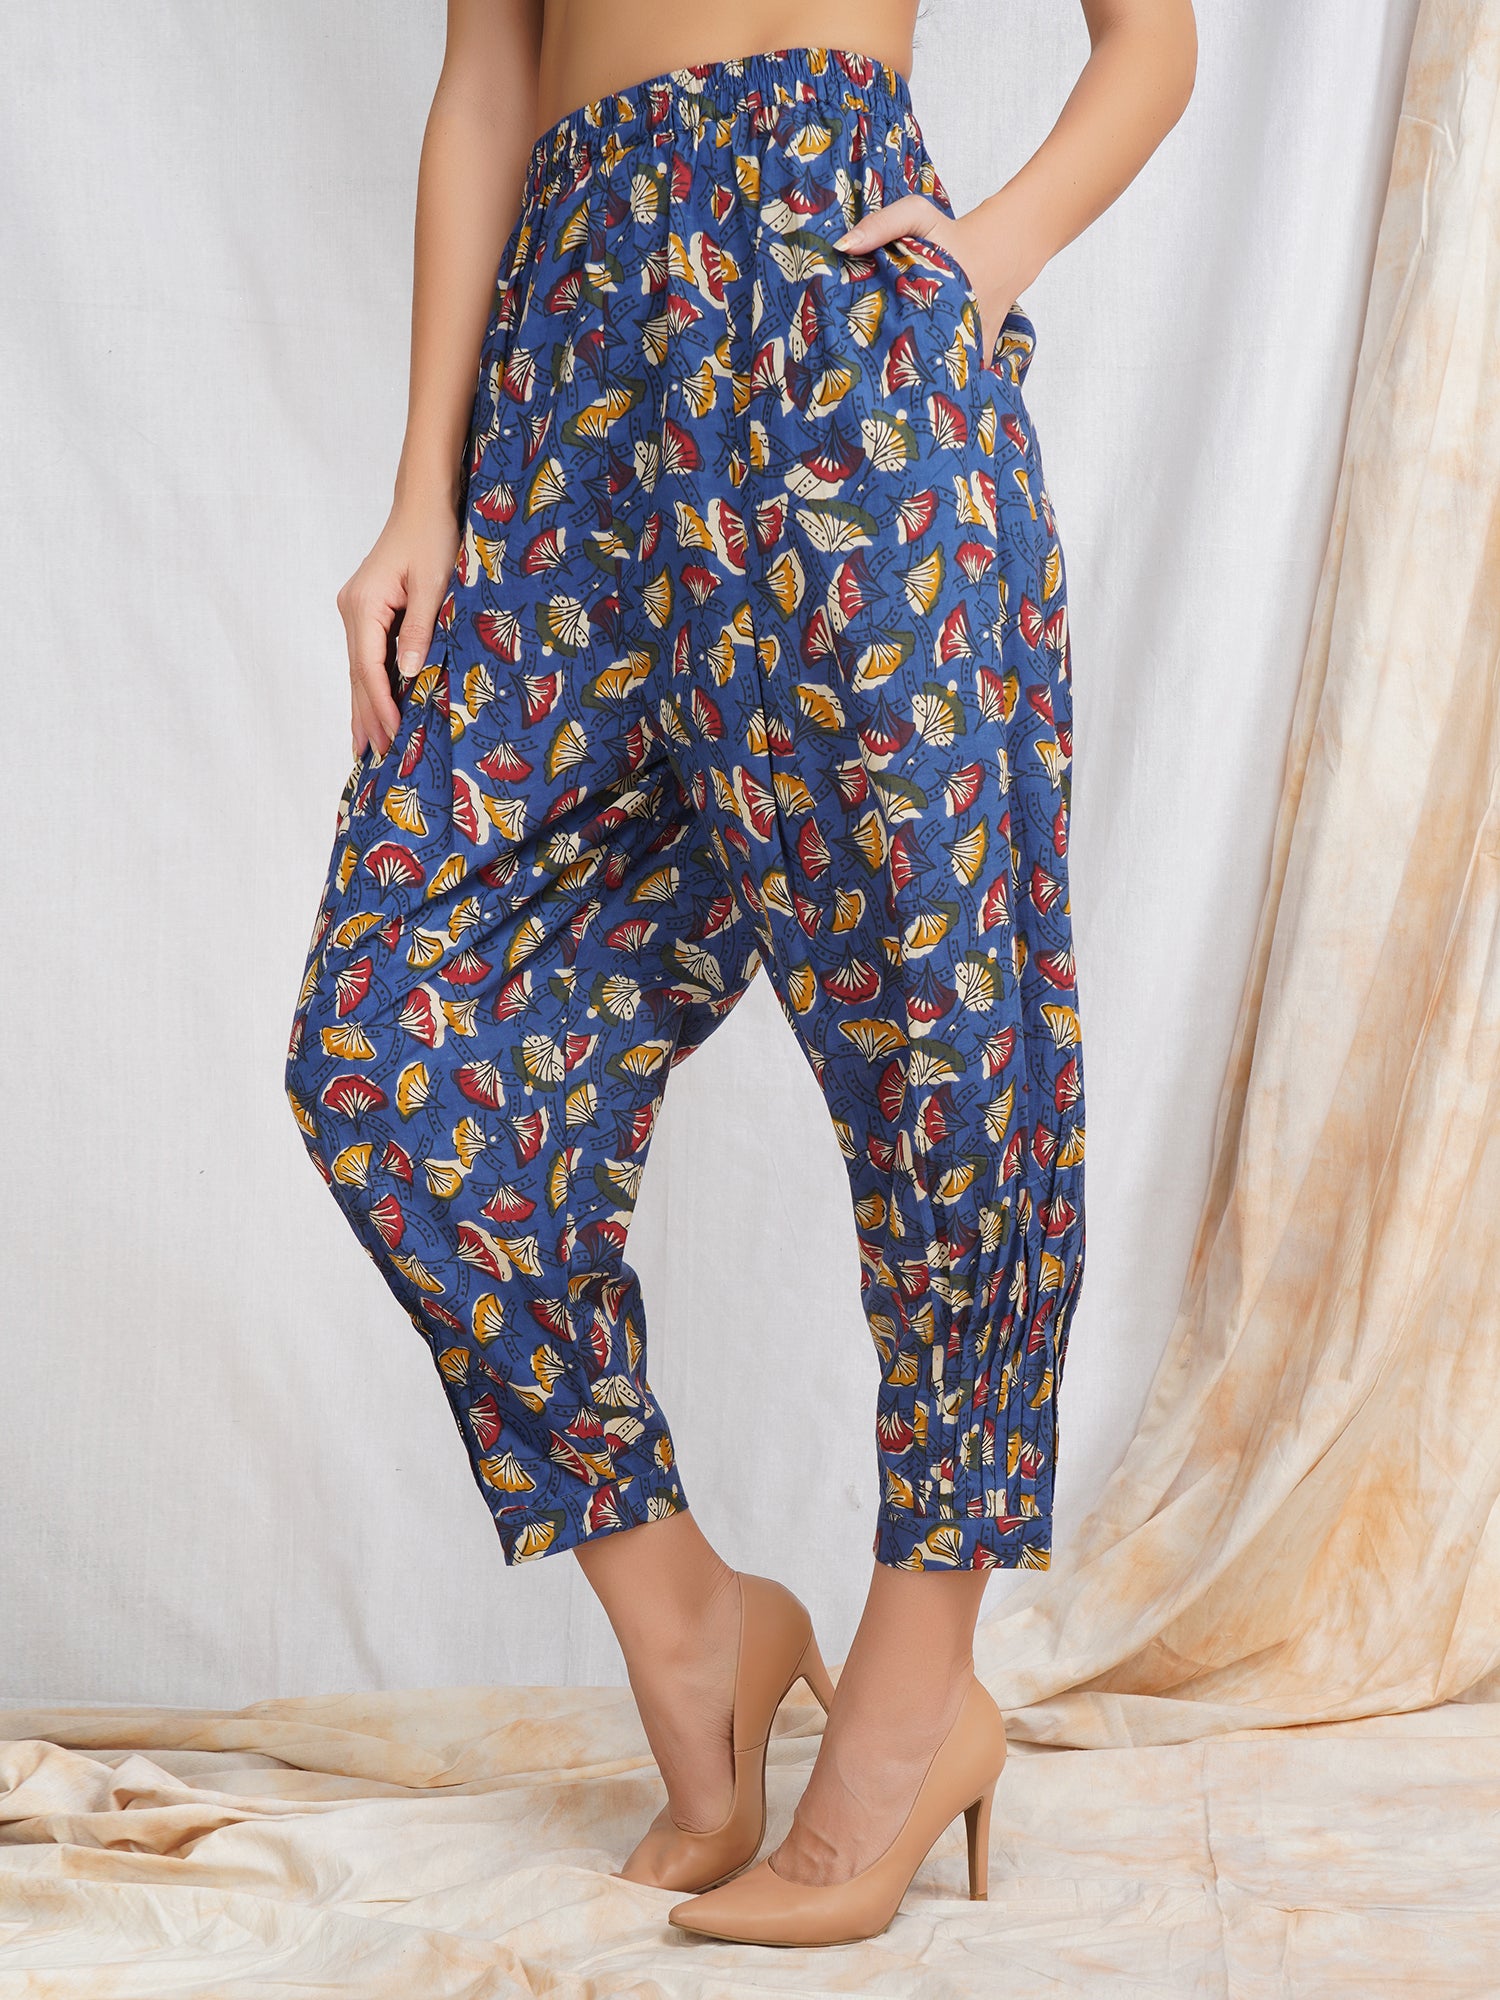 Ayaany All Purpose Multi Crop Pants With Smart Fit - Ayaany.com